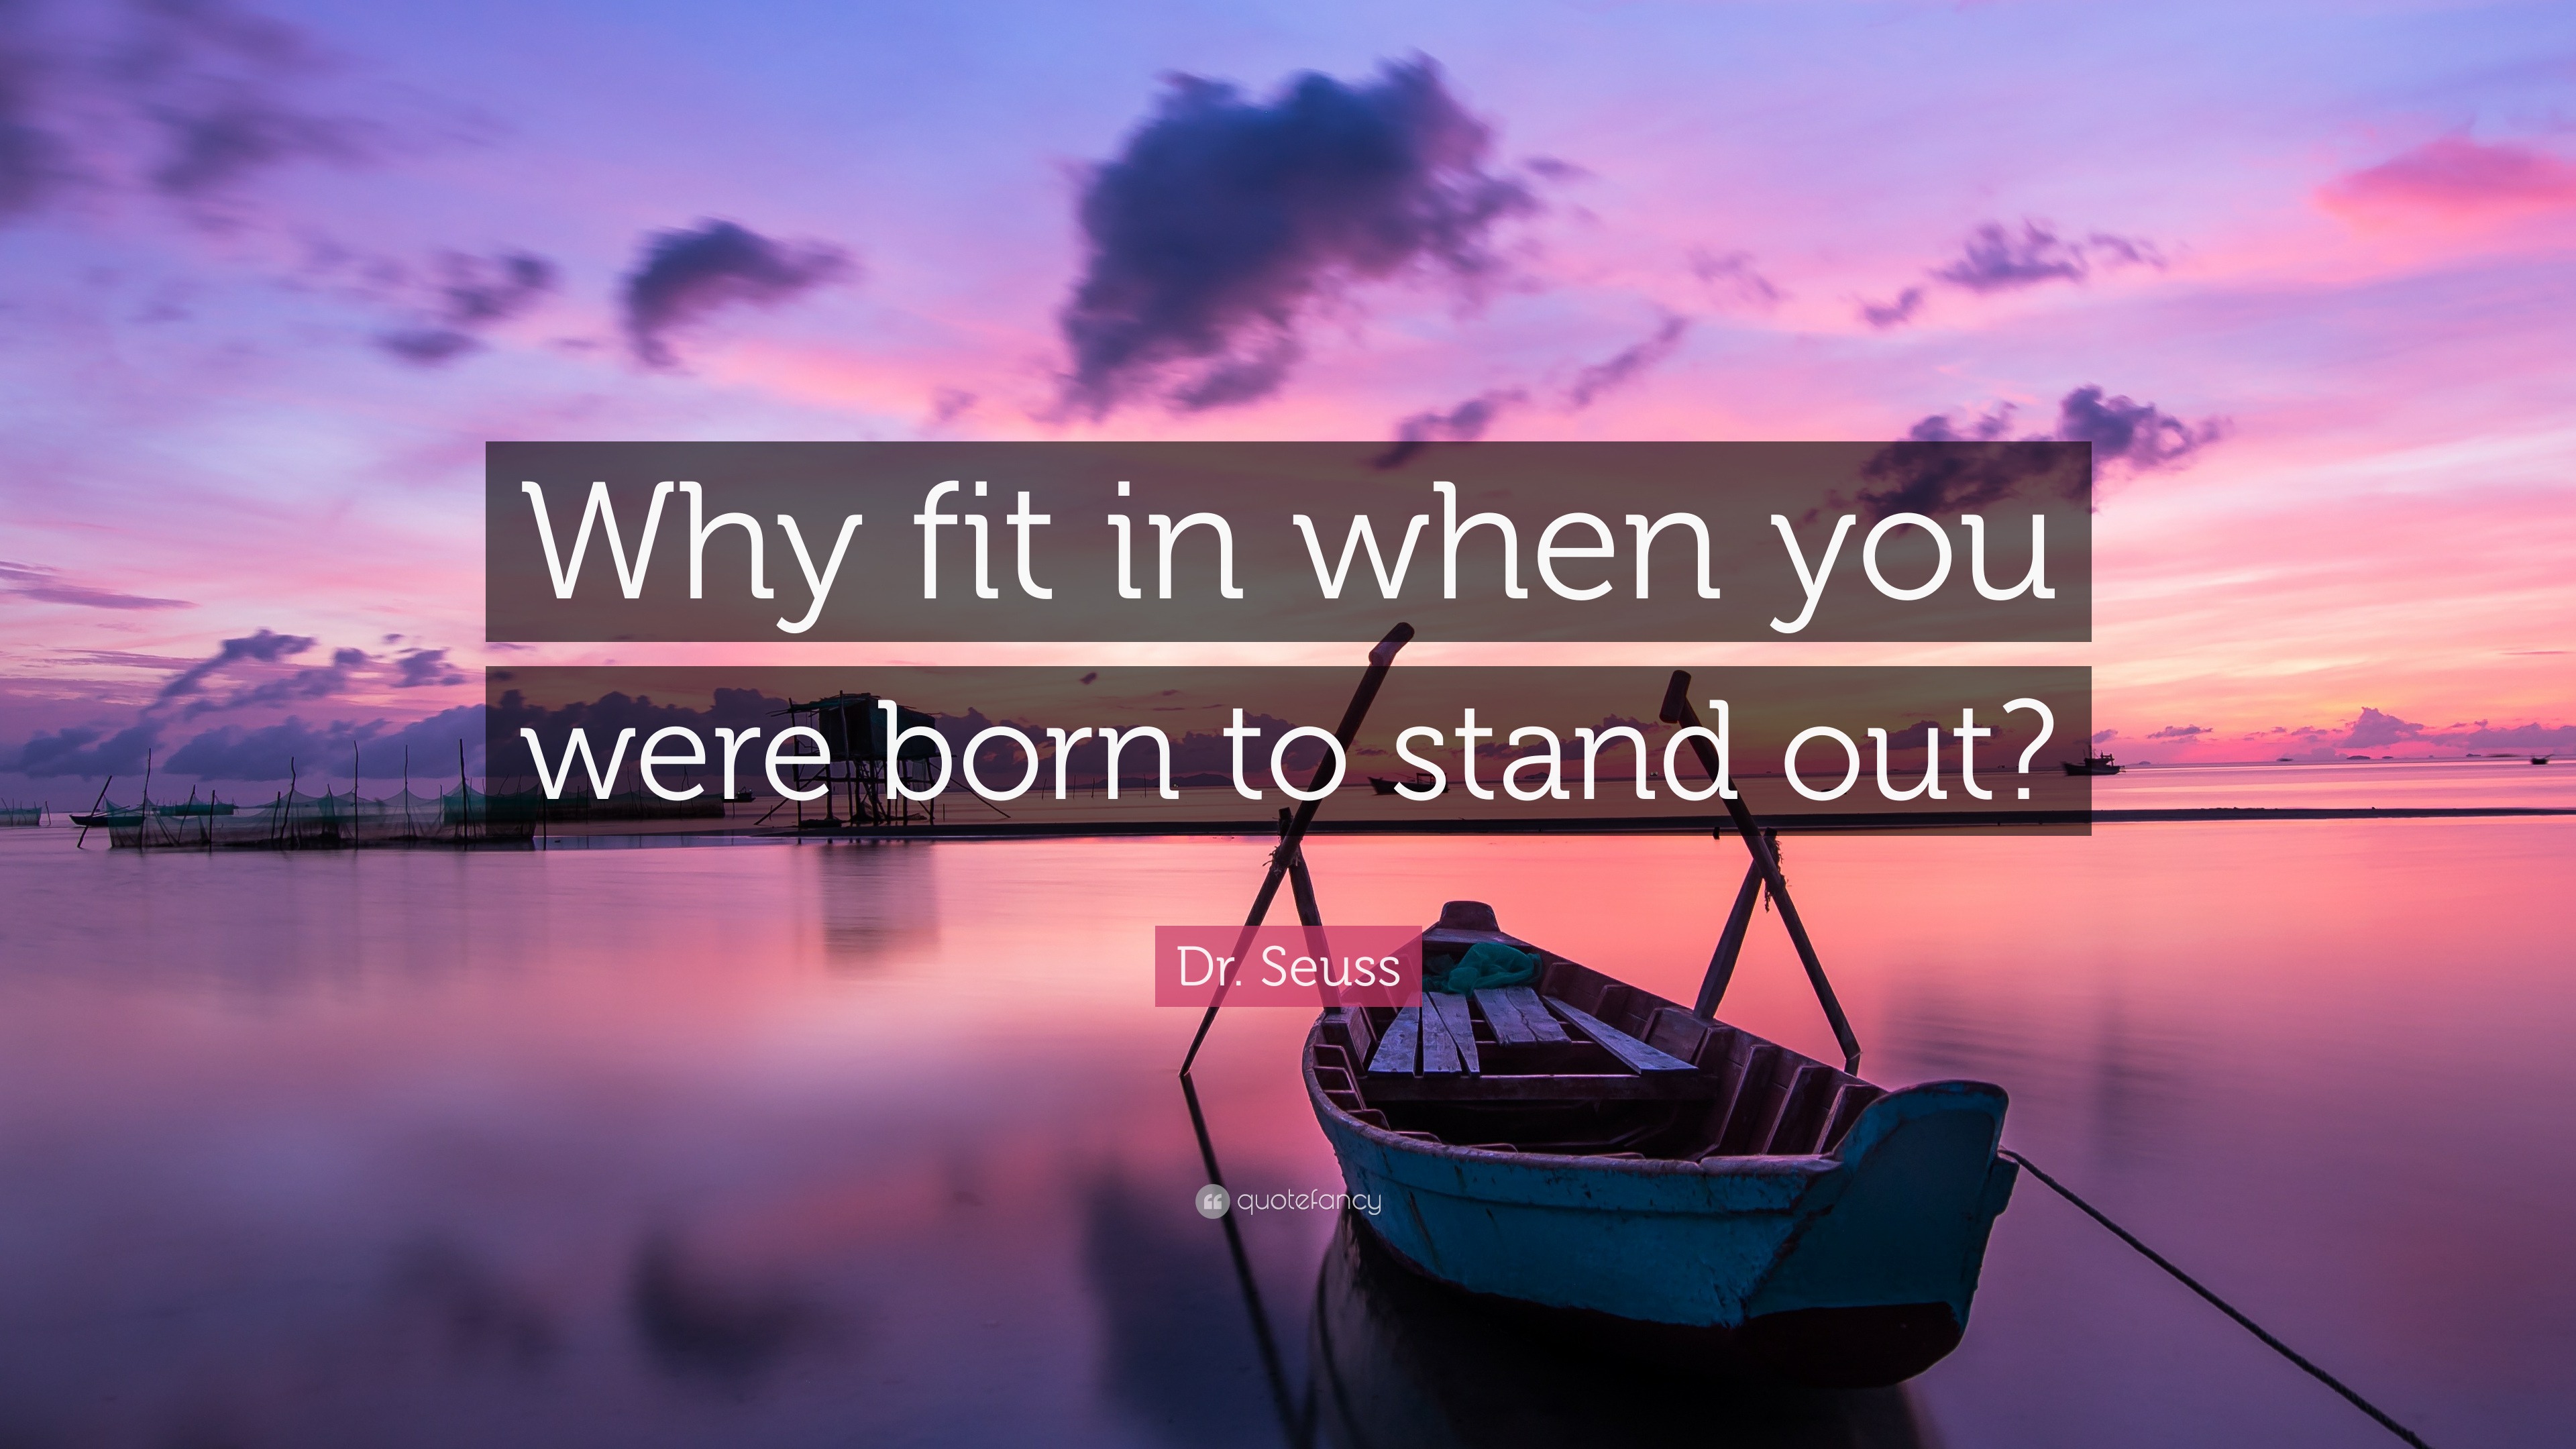 Dr. Seuss Quote: “Why fit in when you were born to stand out?” (13